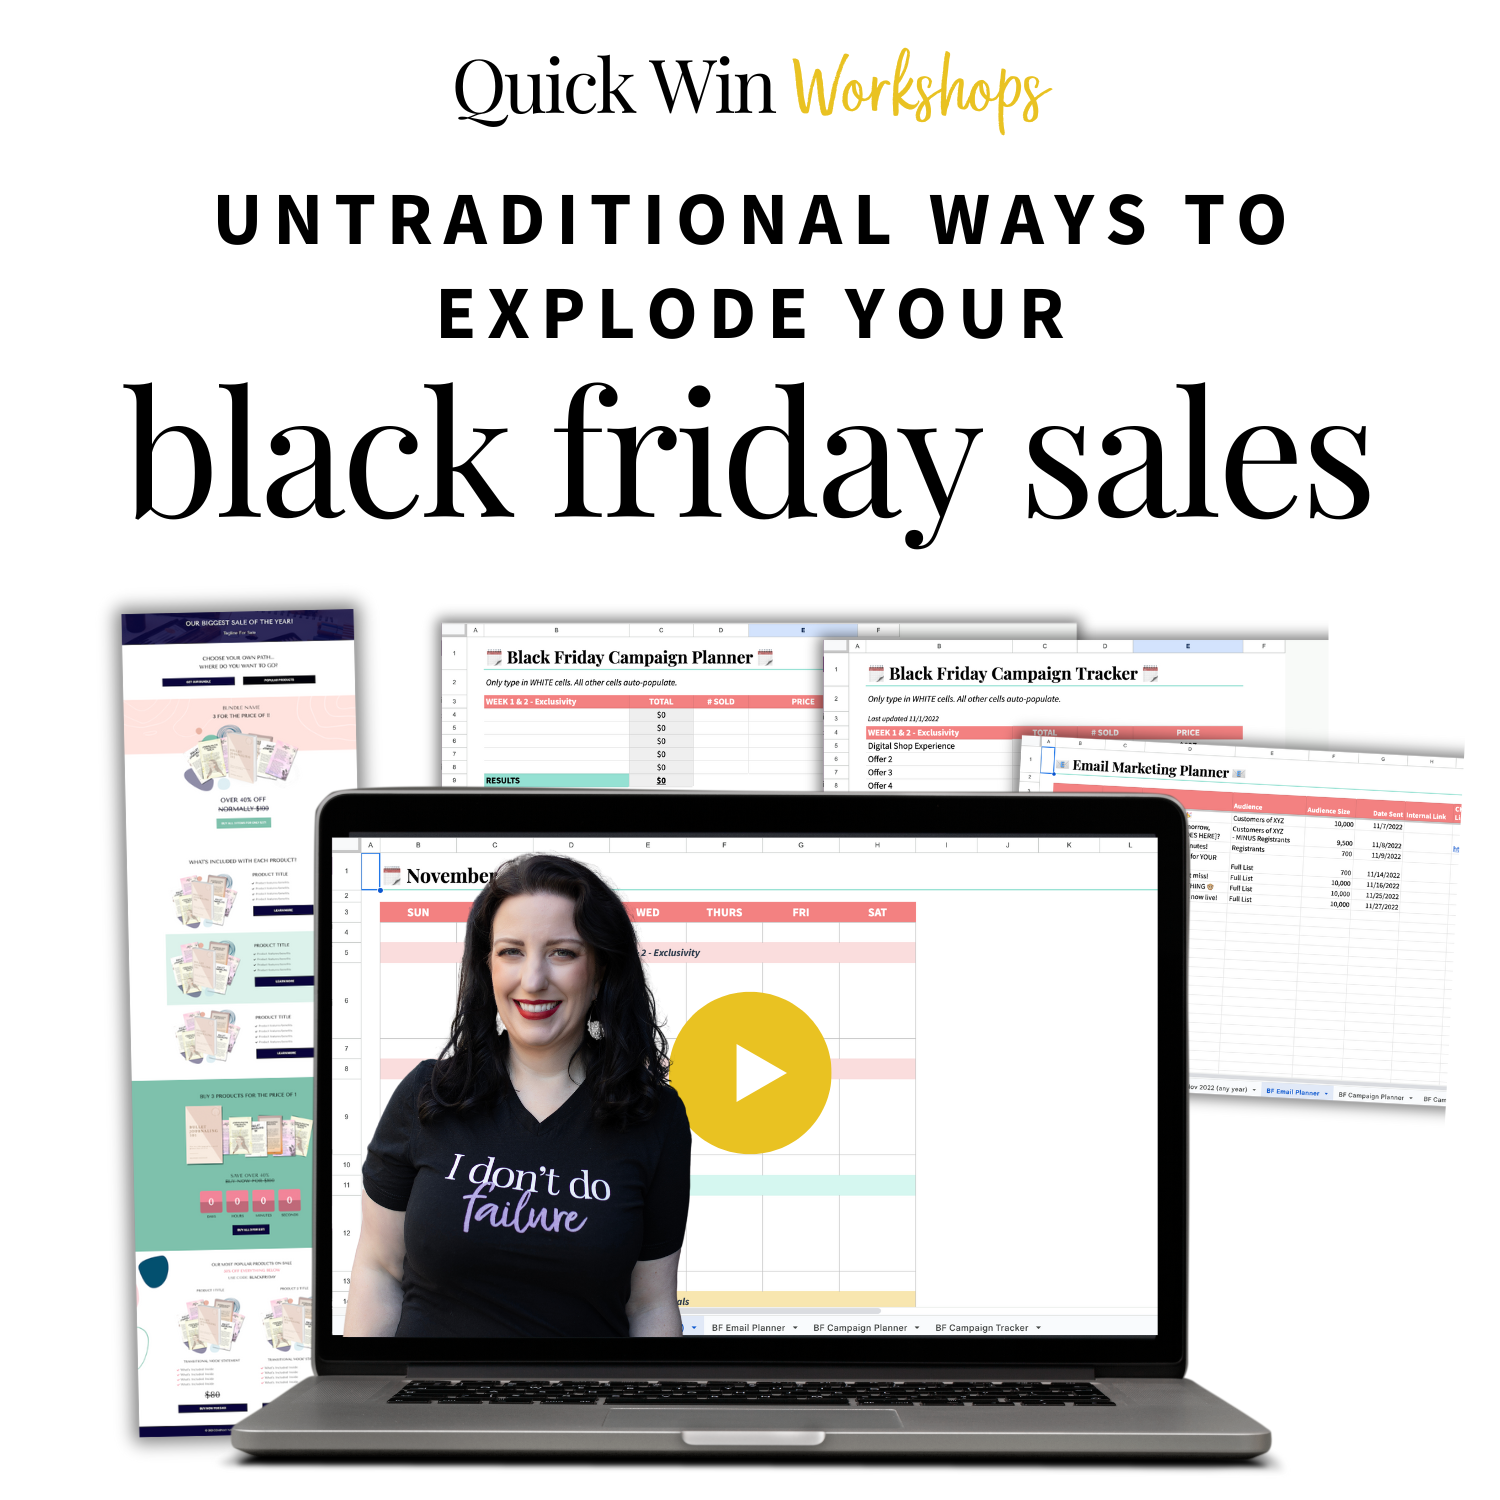 Quick Win Workshop: Untraditional Ways to Explode Your Black Friday Sales